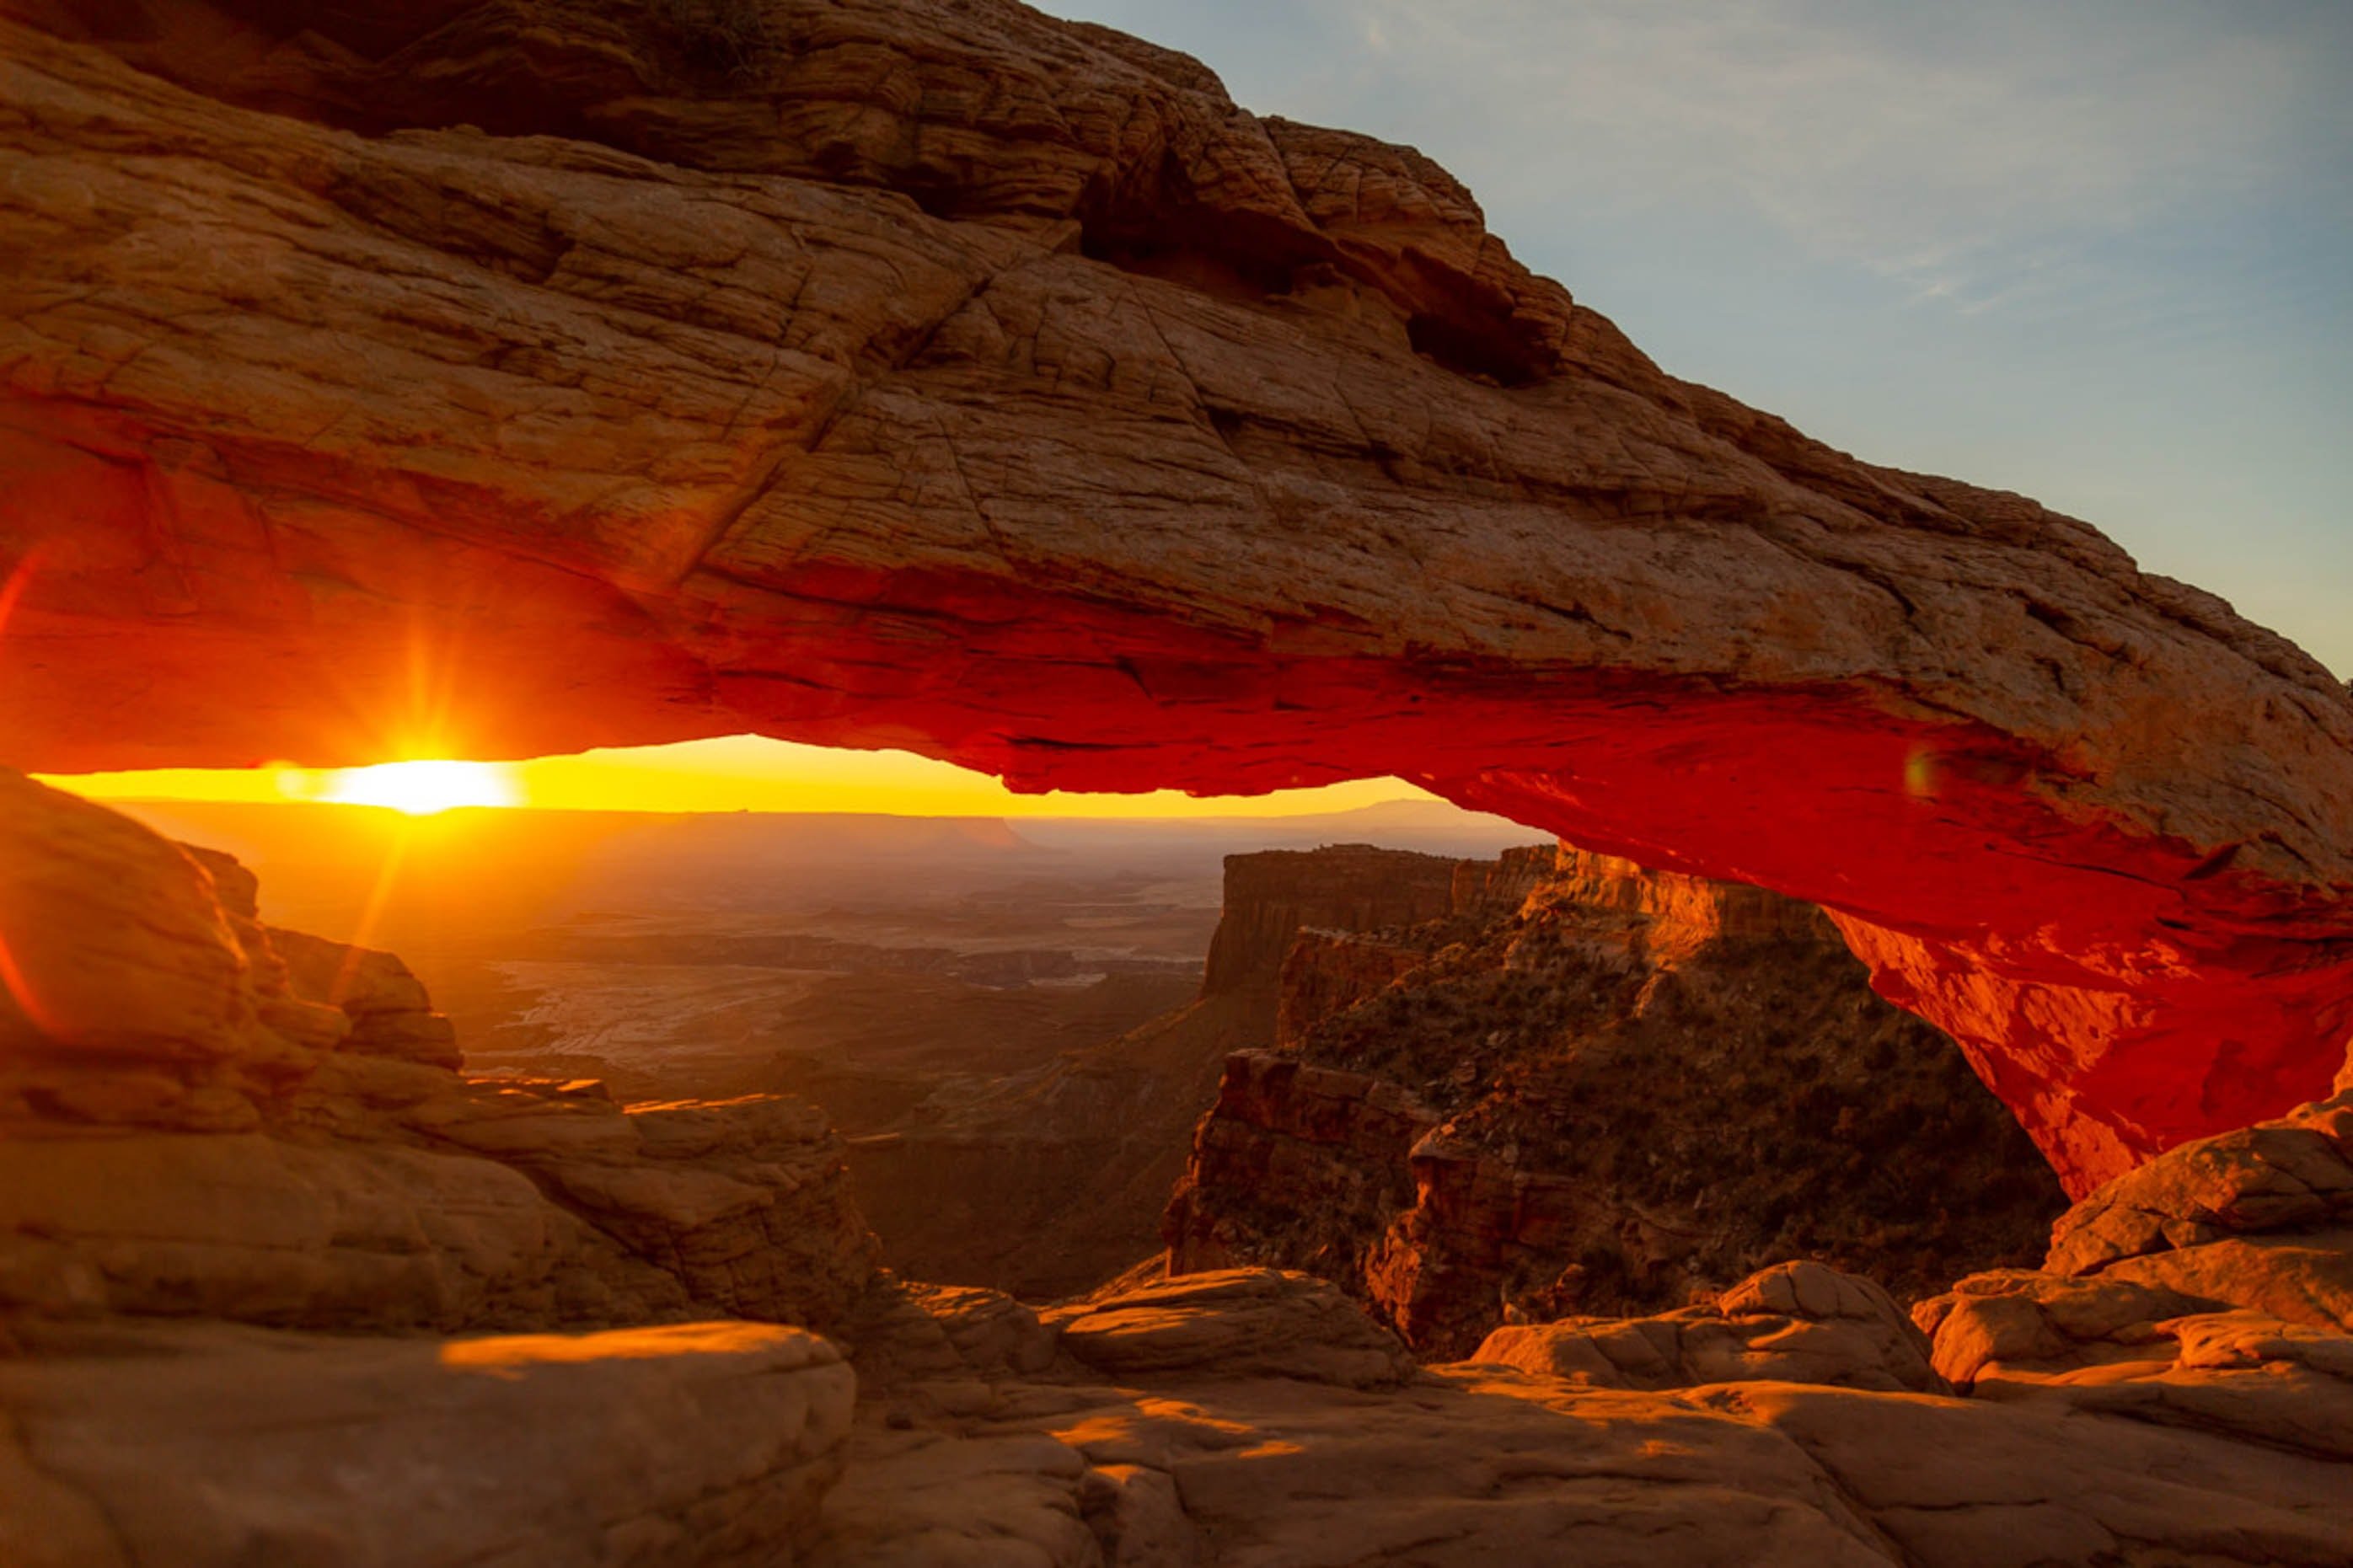 Canyonlands National Park, carved by the Colorado river.